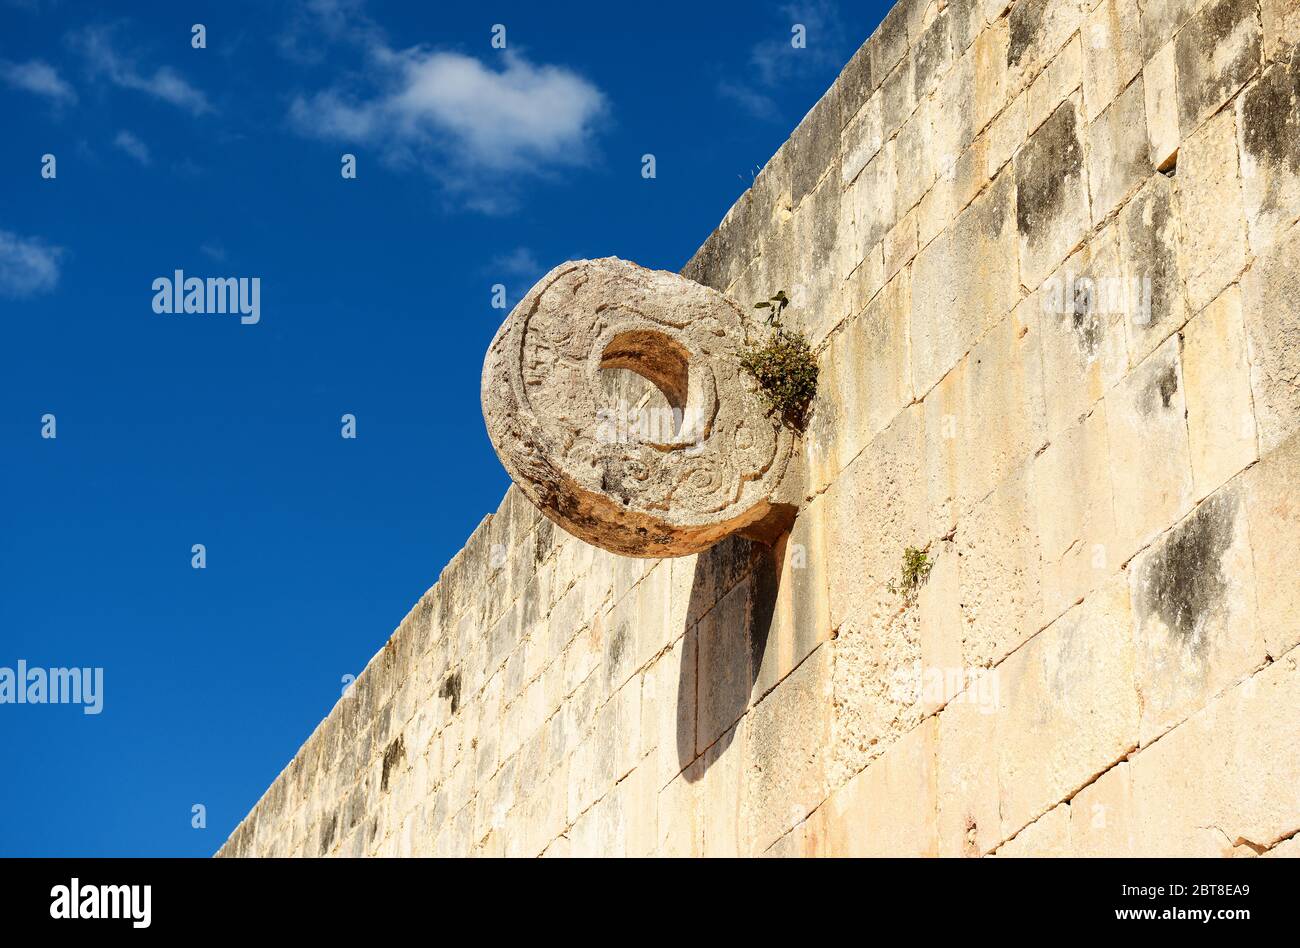 A stone ballcourt goal or ring used by the ancient maya to play the mesoamerican ball game, Chichen Itza Mayan Ruin, Yucatan, Mexico. Stock Photo